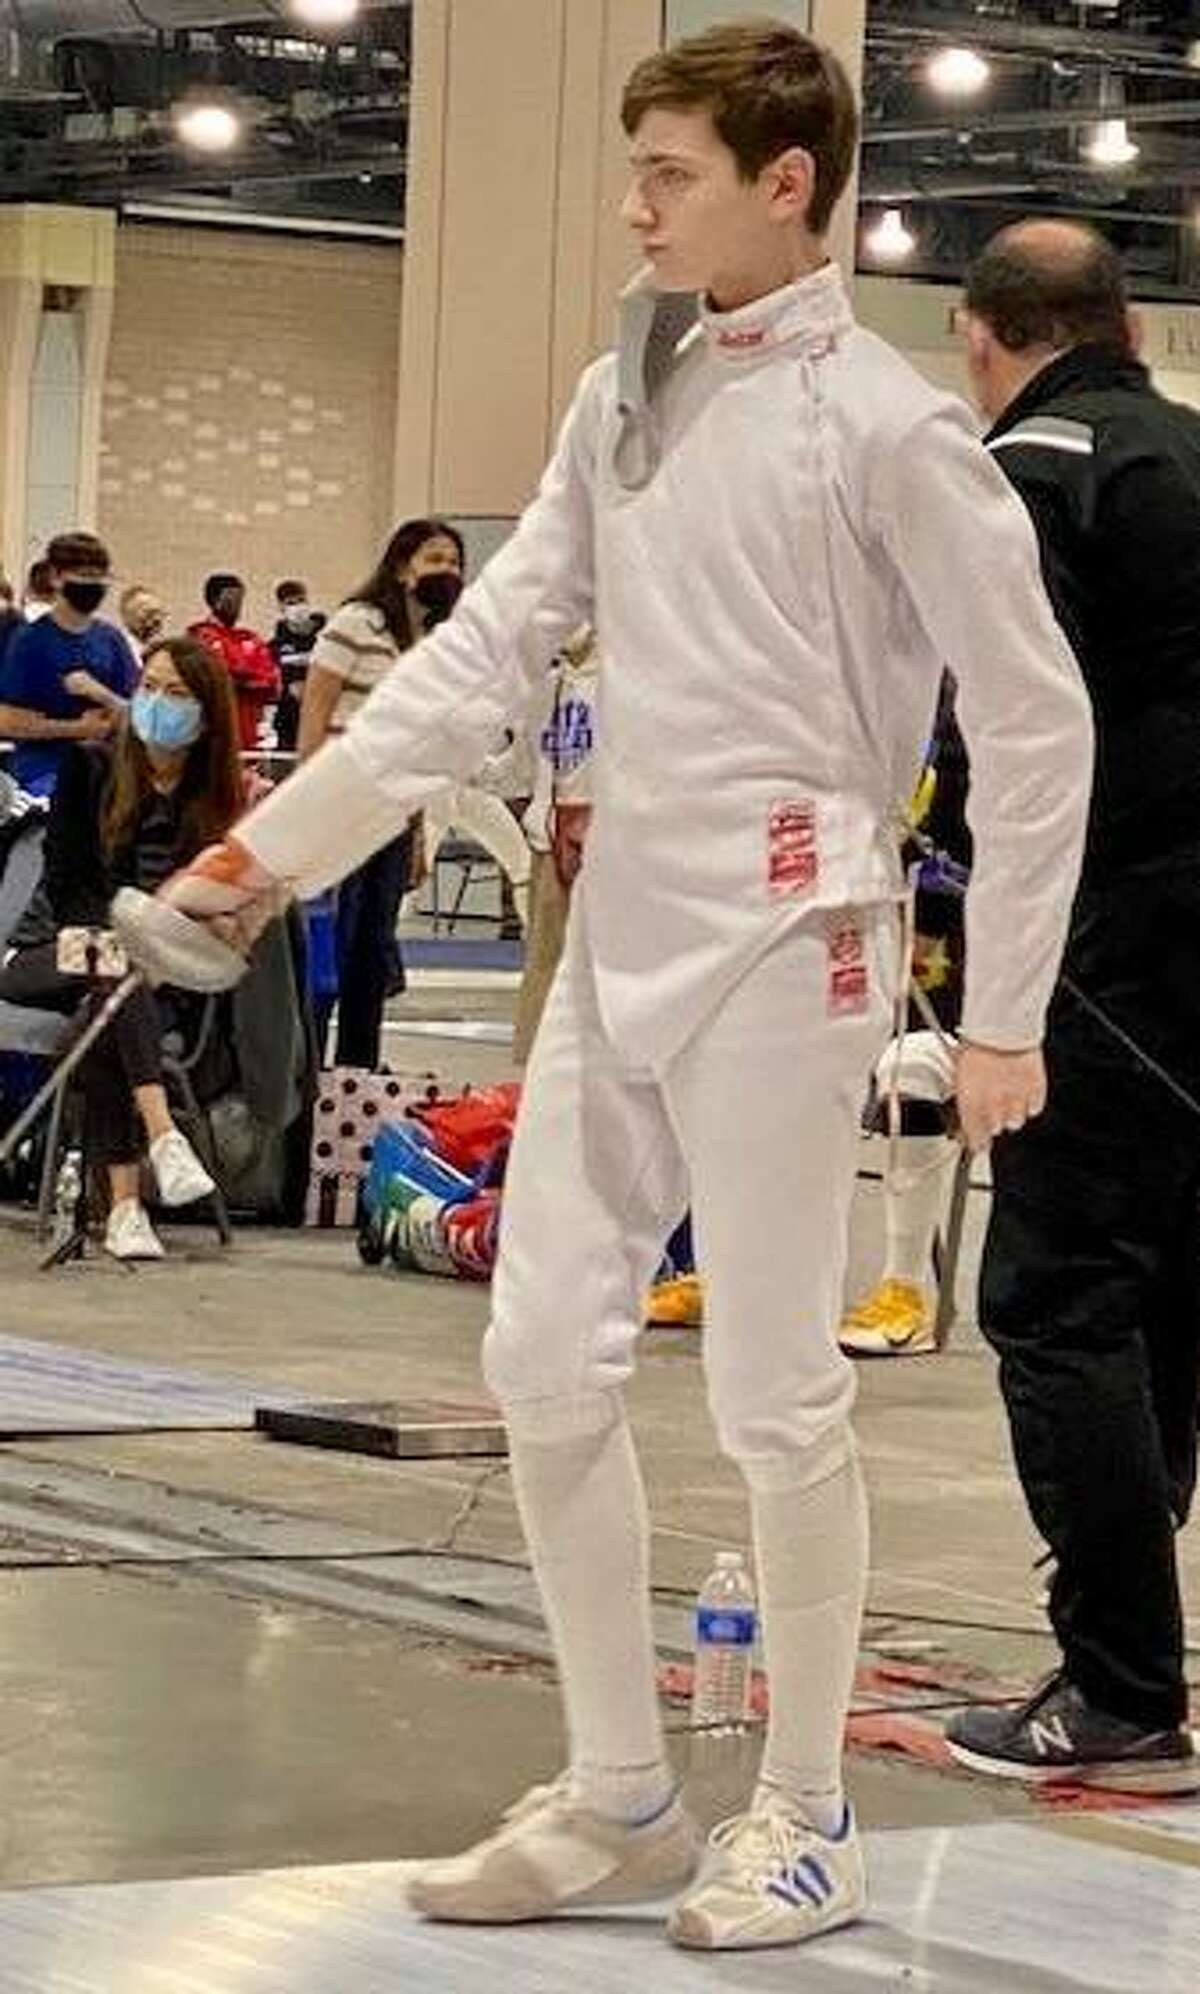 The Woodlands High School student John Neal has been fencing since about 7 or 8 years old.